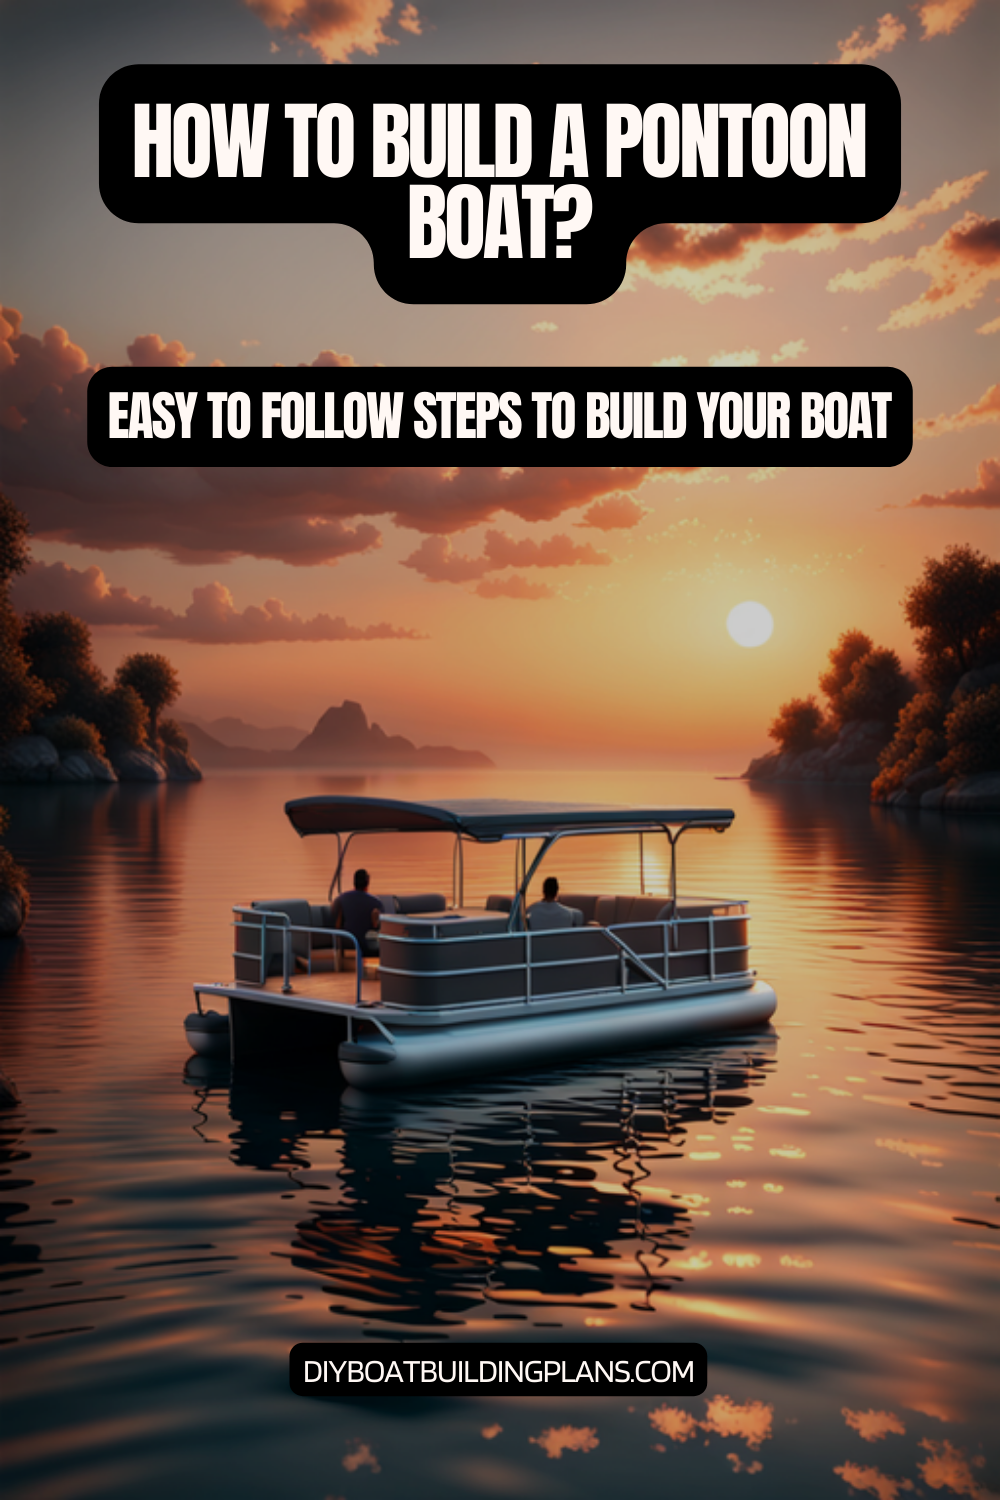 How To Build A Pontoon Boat